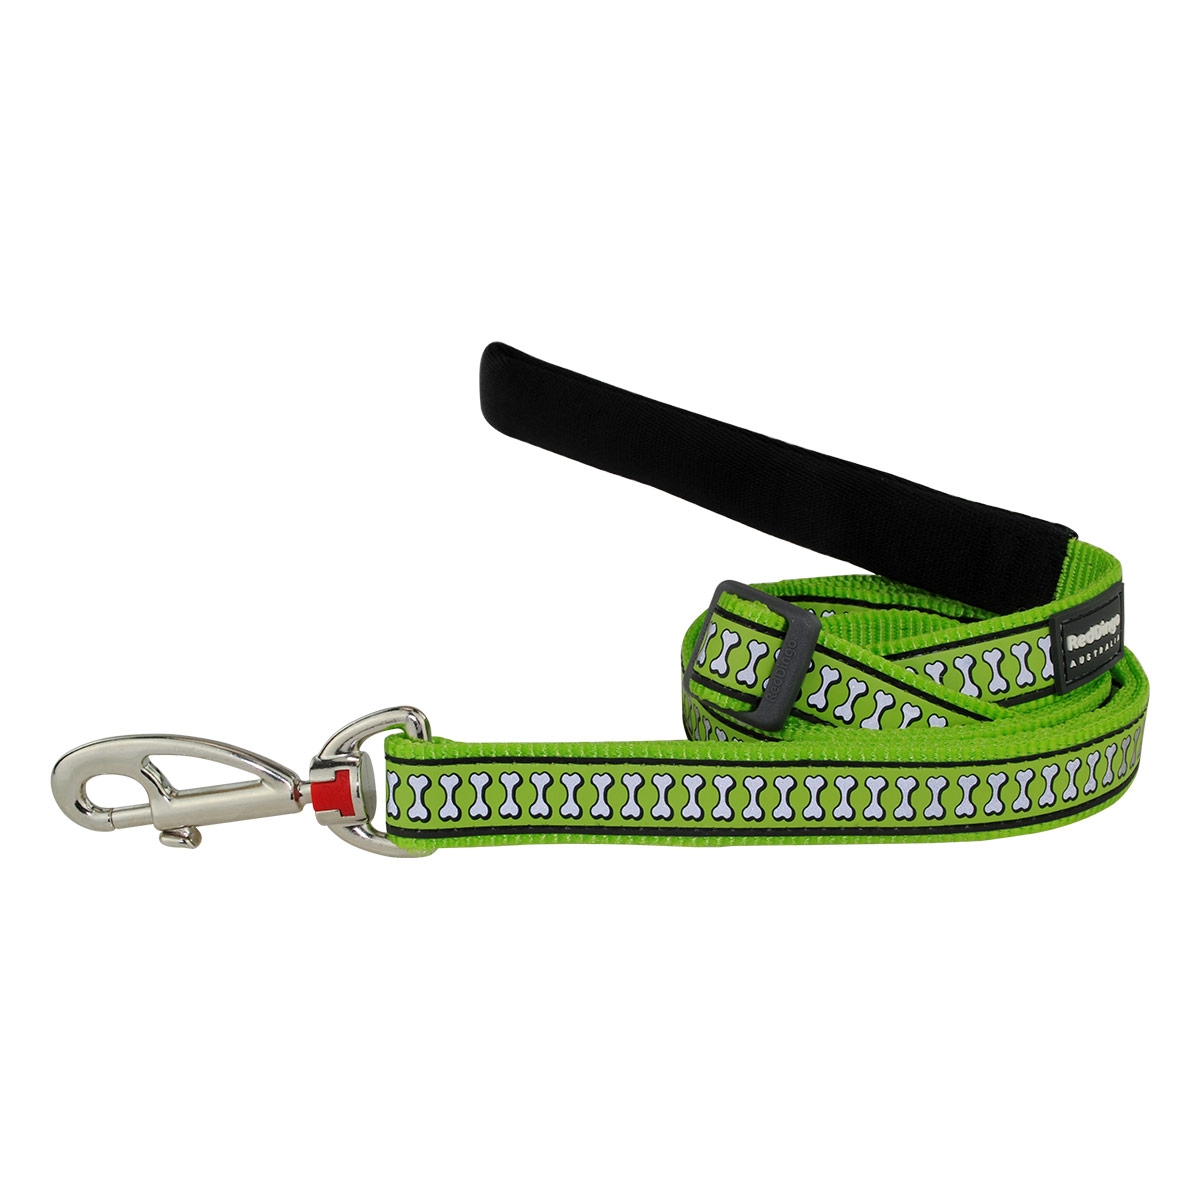 Picture of Red Dingo L6-RB-LG-20 Dog Lead Reflective Bones Lime Green - Medium  6ft